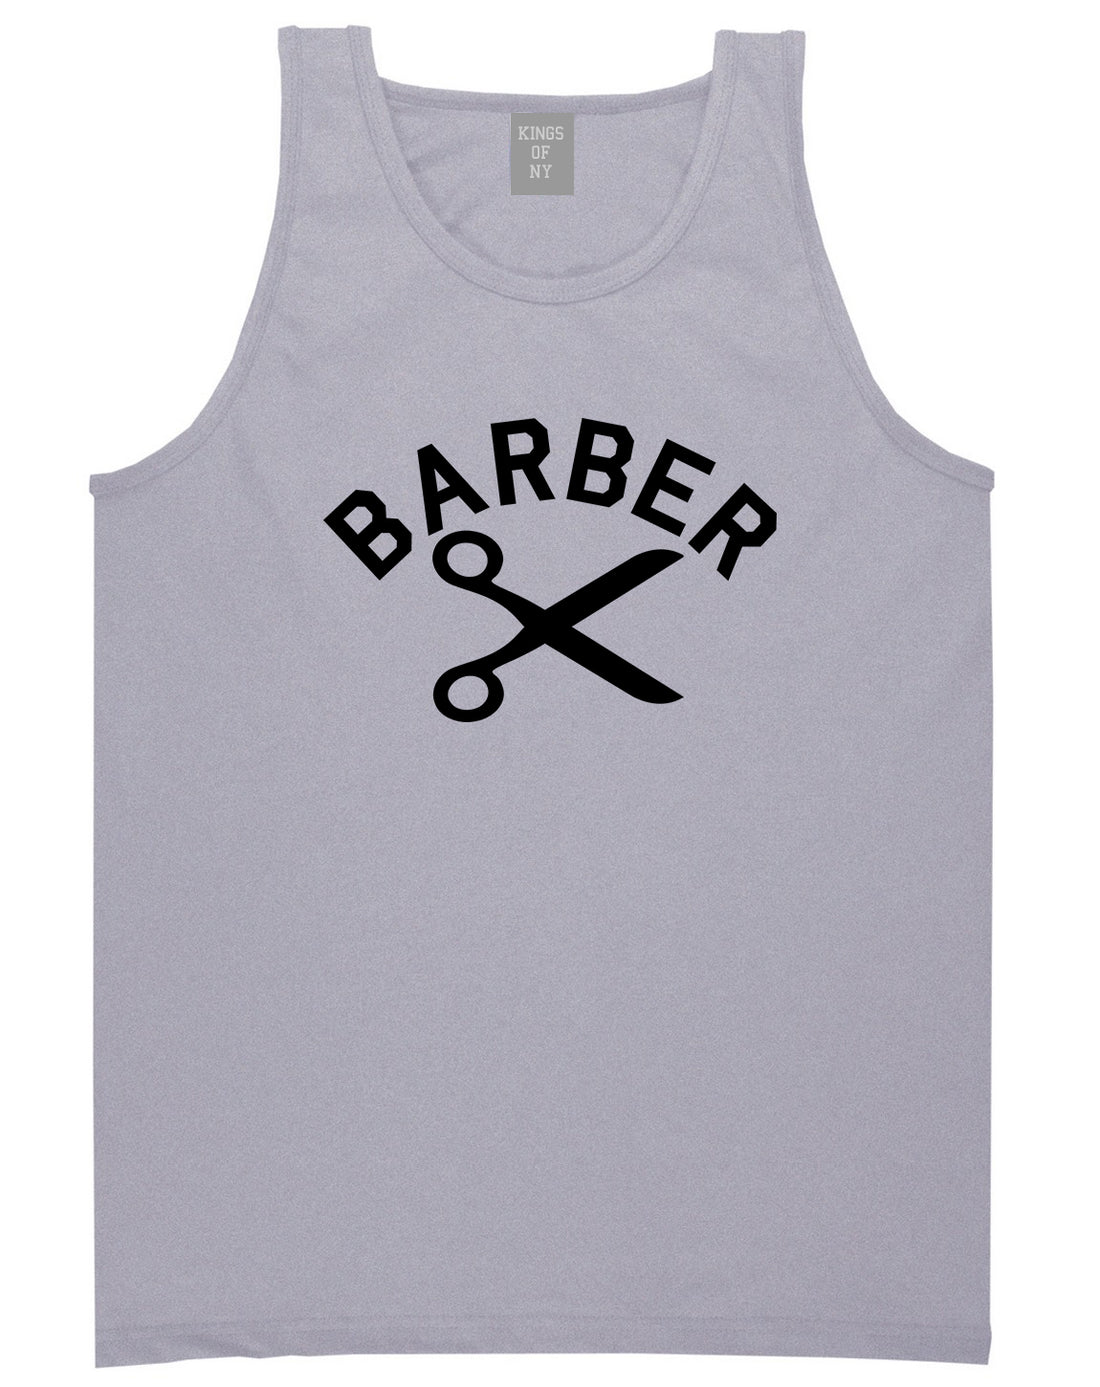 Barber Scissors Grey Tank Top Shirt by Kings Of NY